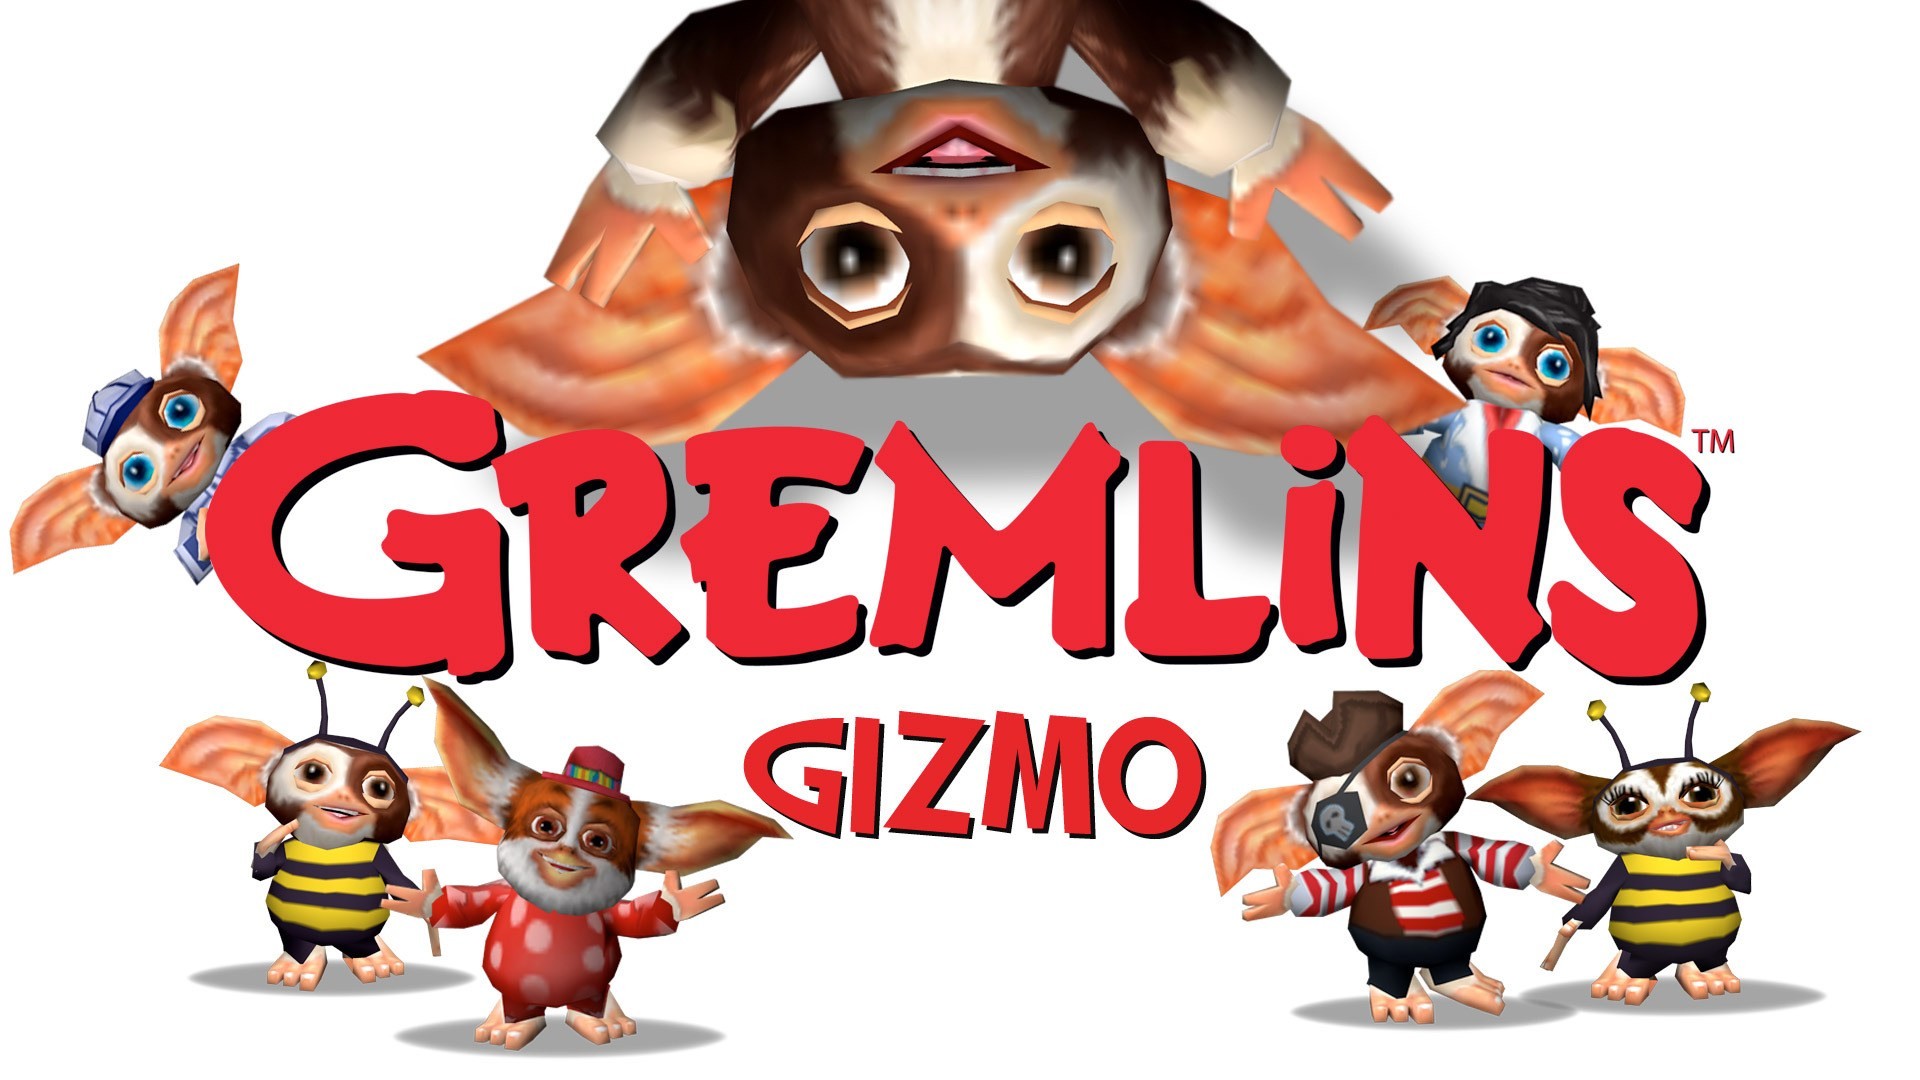 1920x1080 Cool Gizmo From Gremlins Wallpaper HD Wallpapers of Nature- Full HD 1080p  Desktop Backgrounds for